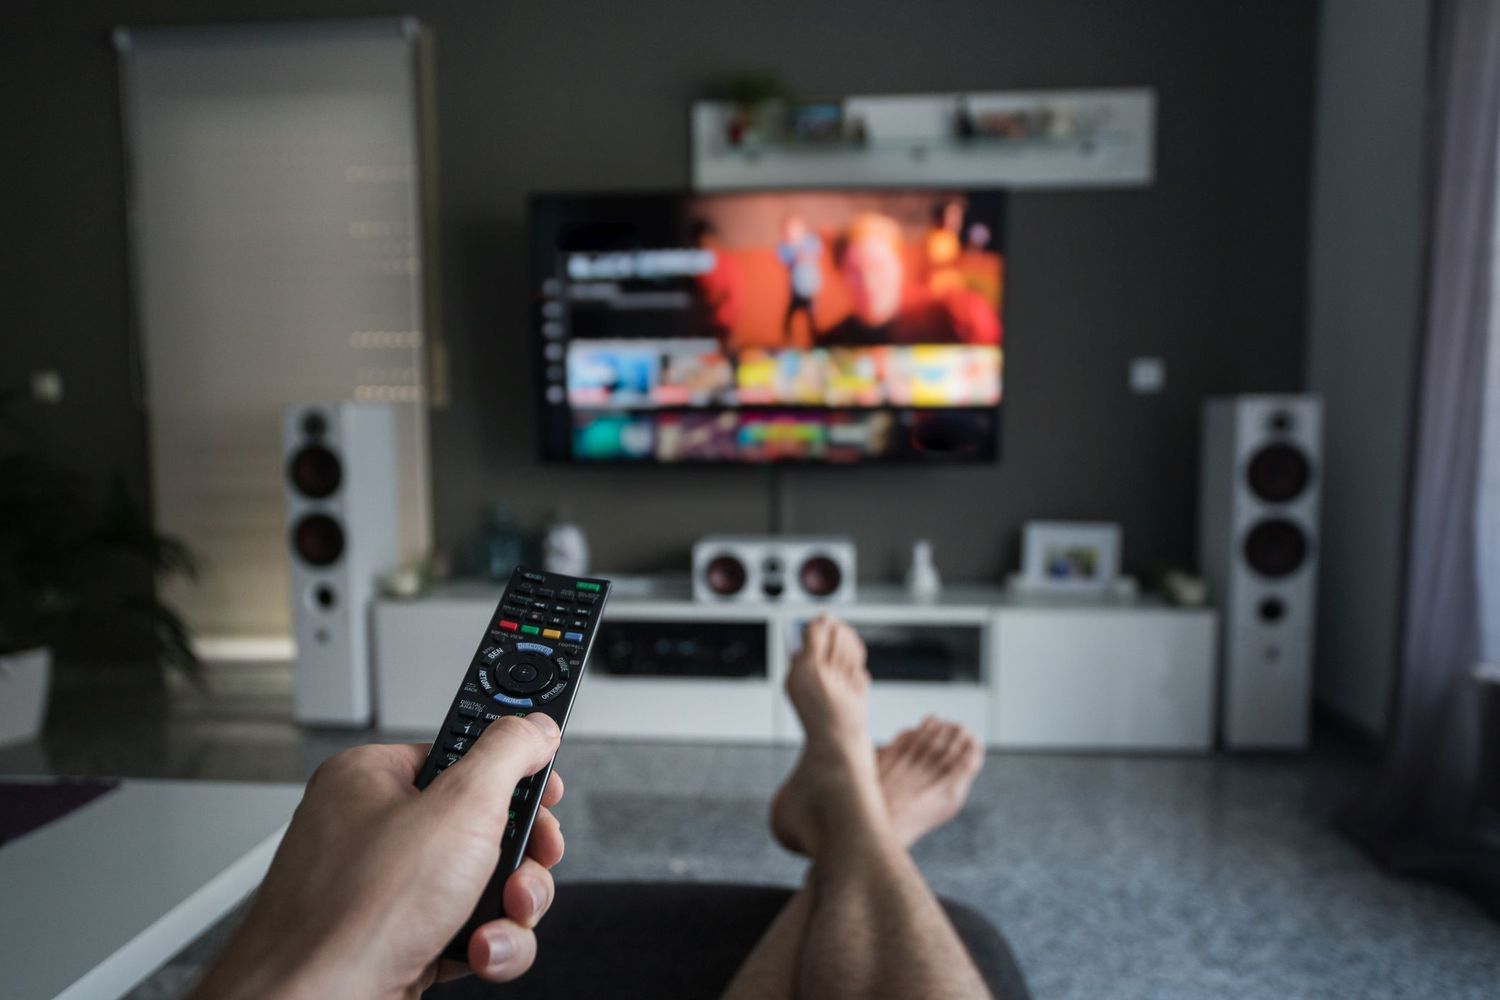 How To Watch Television Without Cable Service